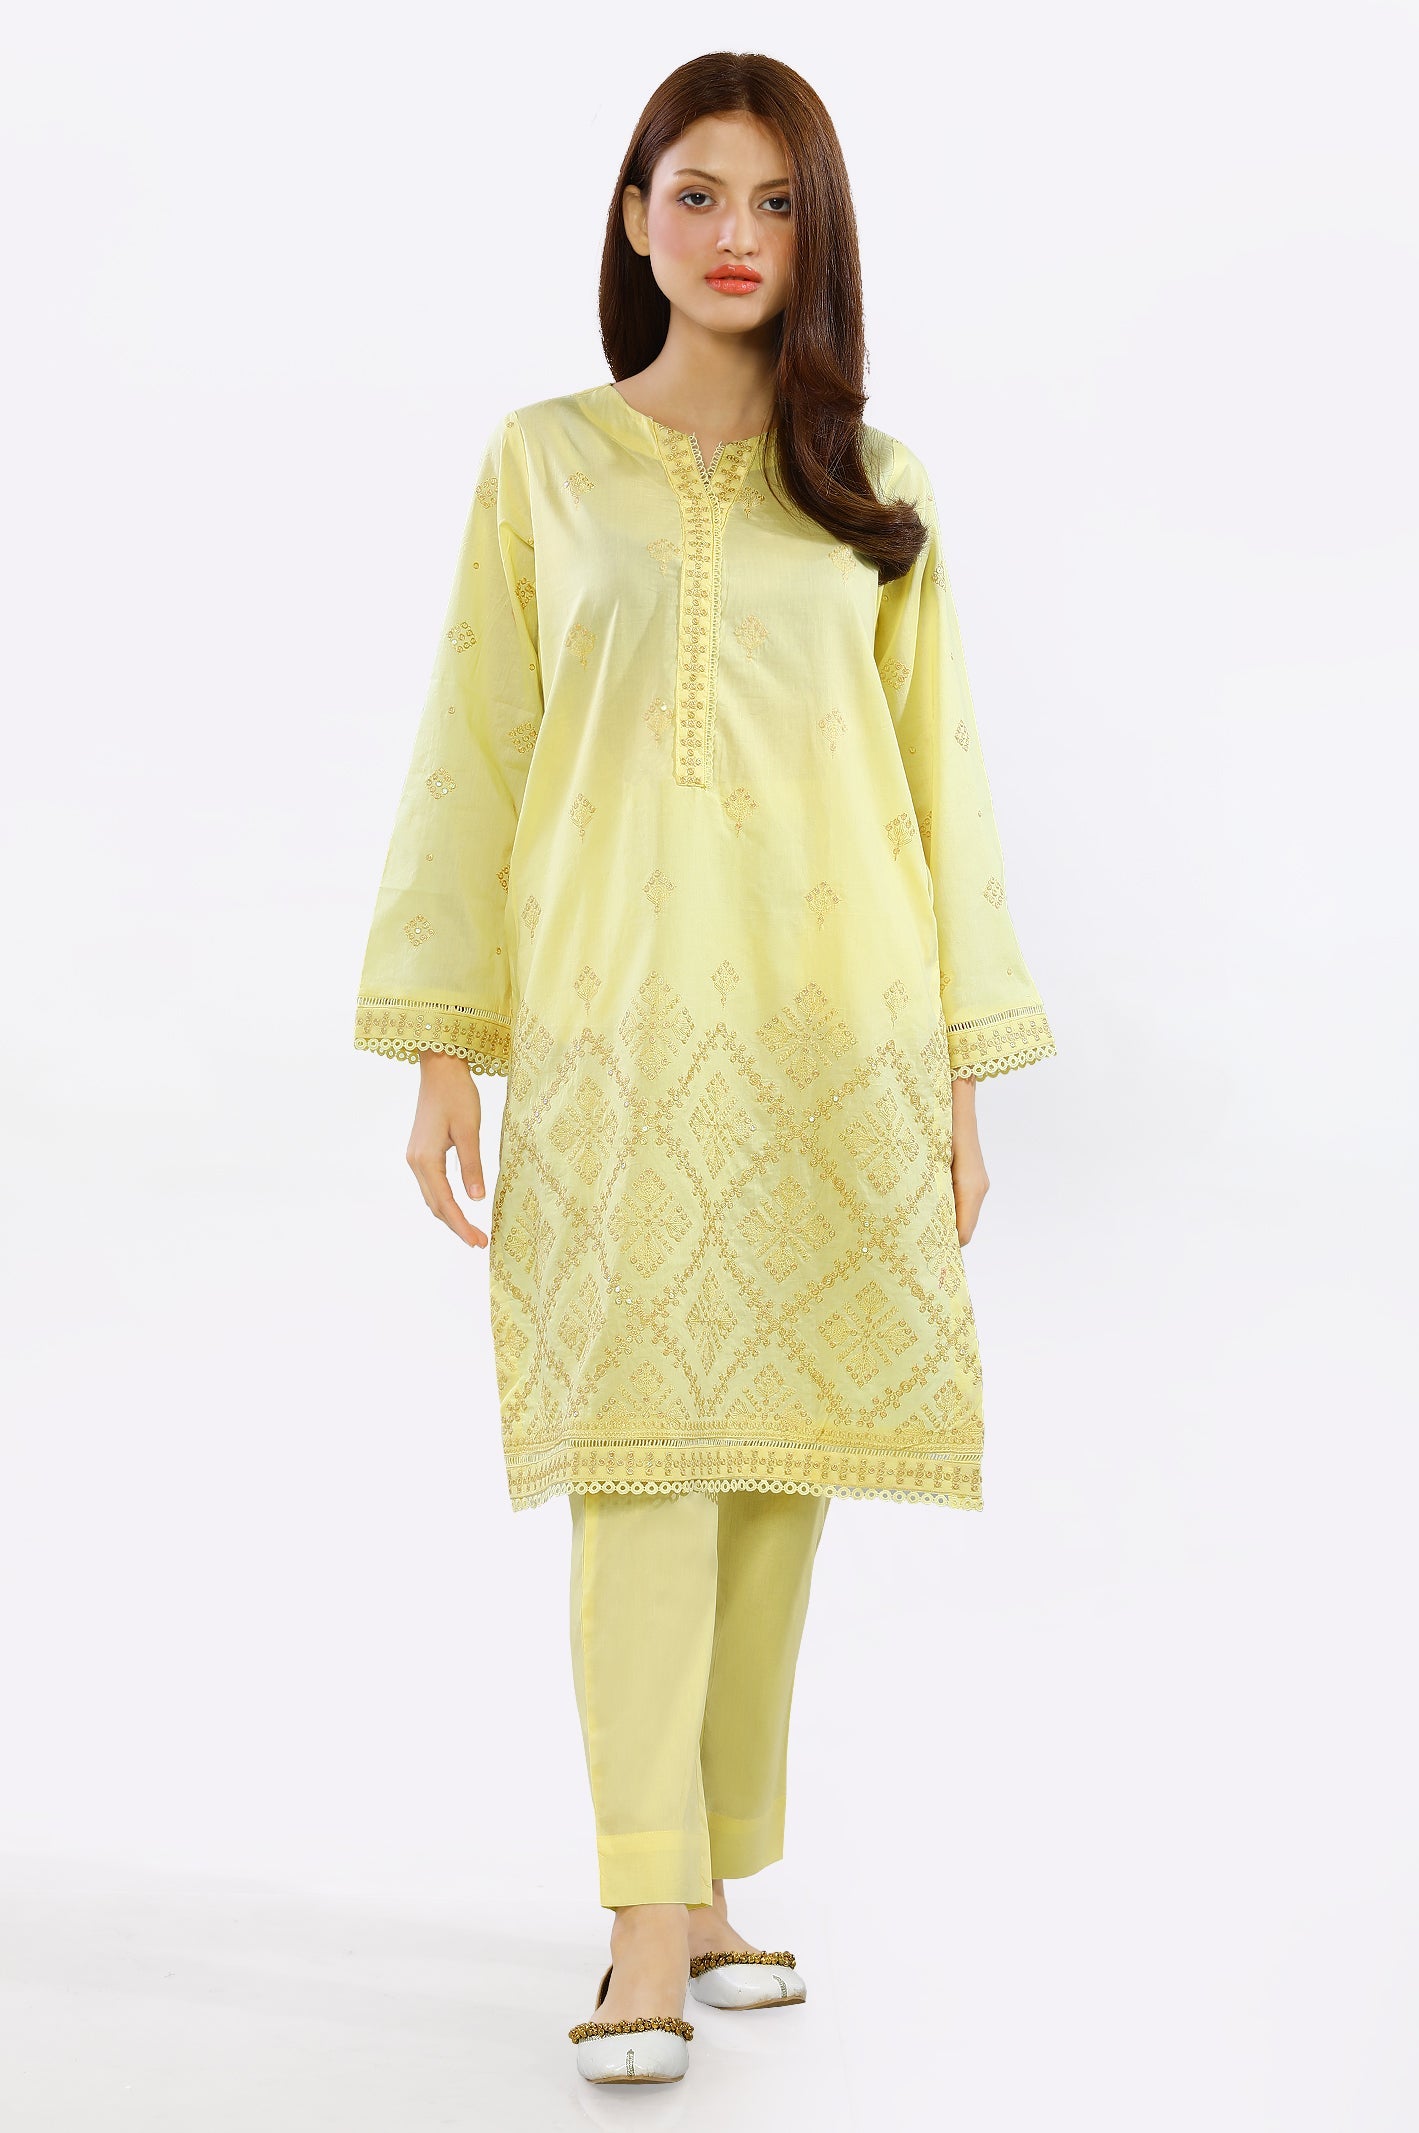 2PC Yellow Suit - Diners